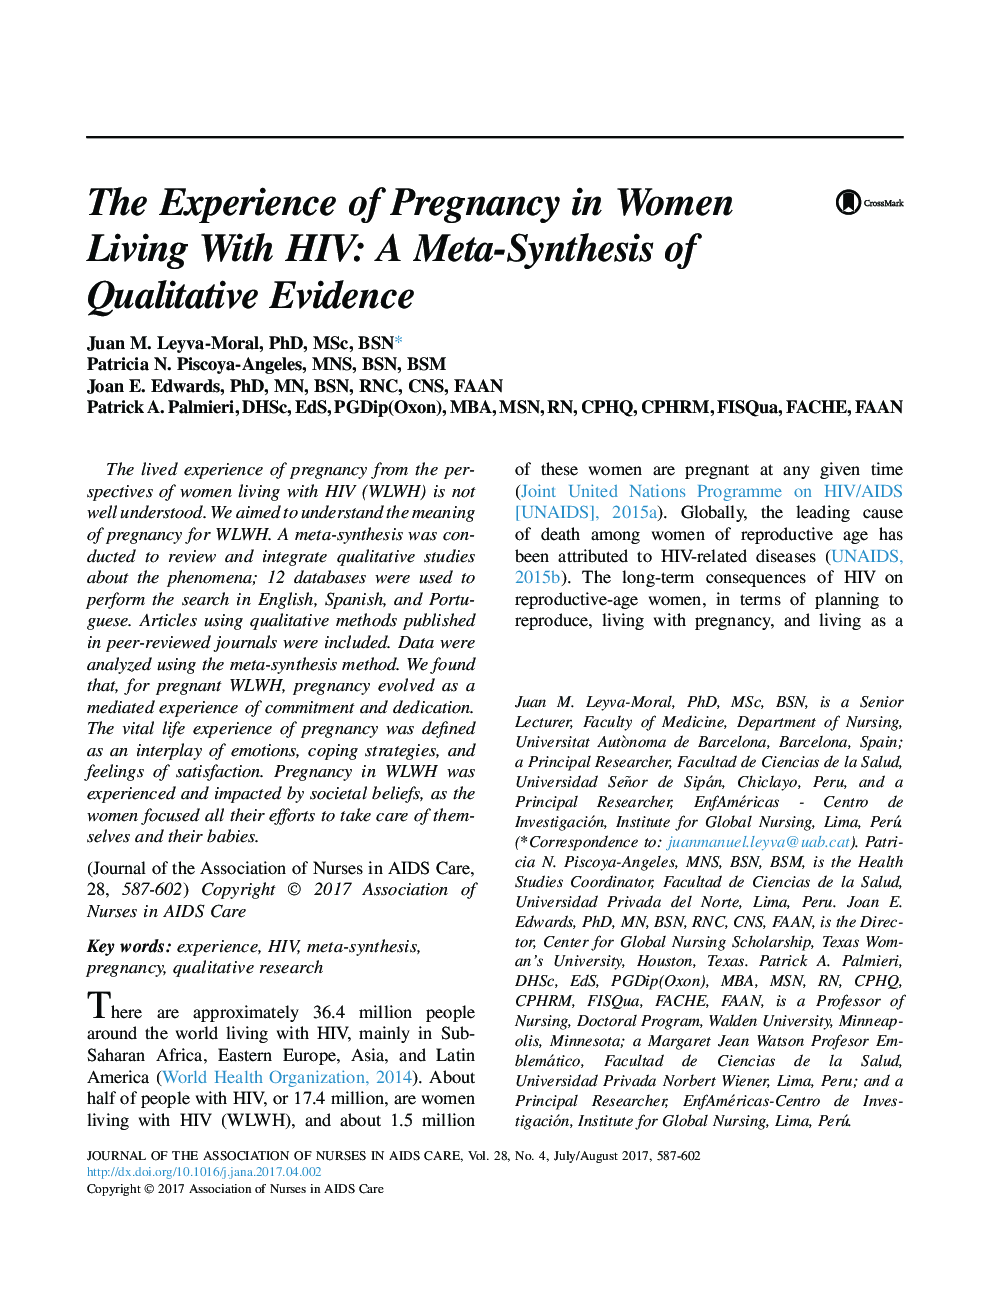 The Experience of Pregnancy in Women Living With HIV: A Meta-Synthesis of Qualitative Evidence